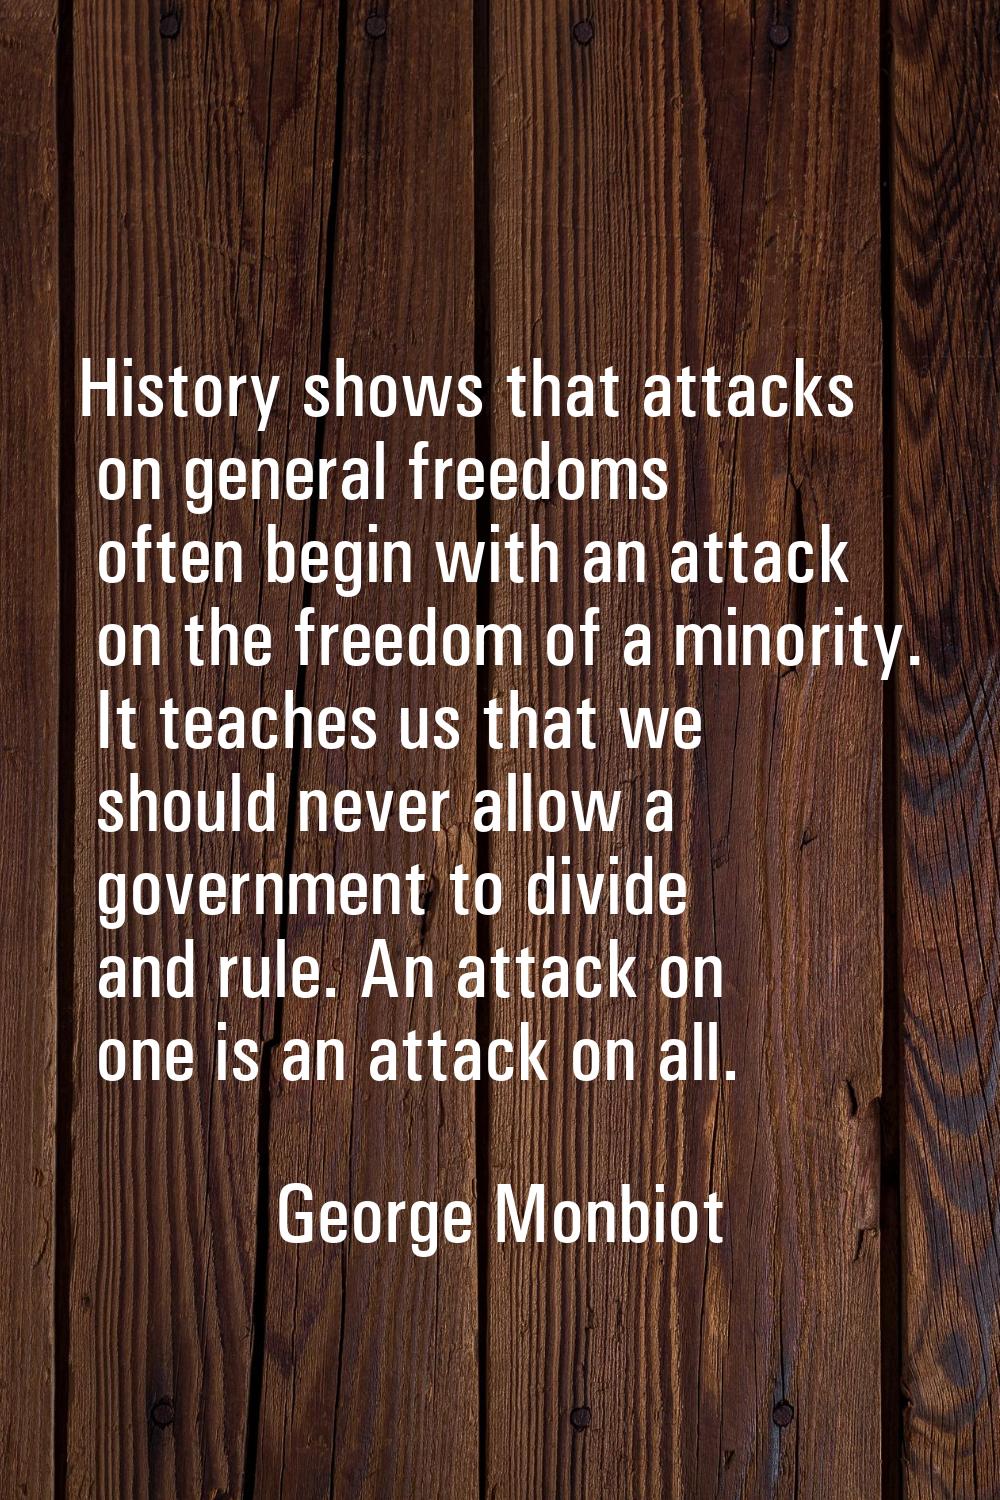 History shows that attacks on general freedoms often begin with an attack on the freedom of a minor